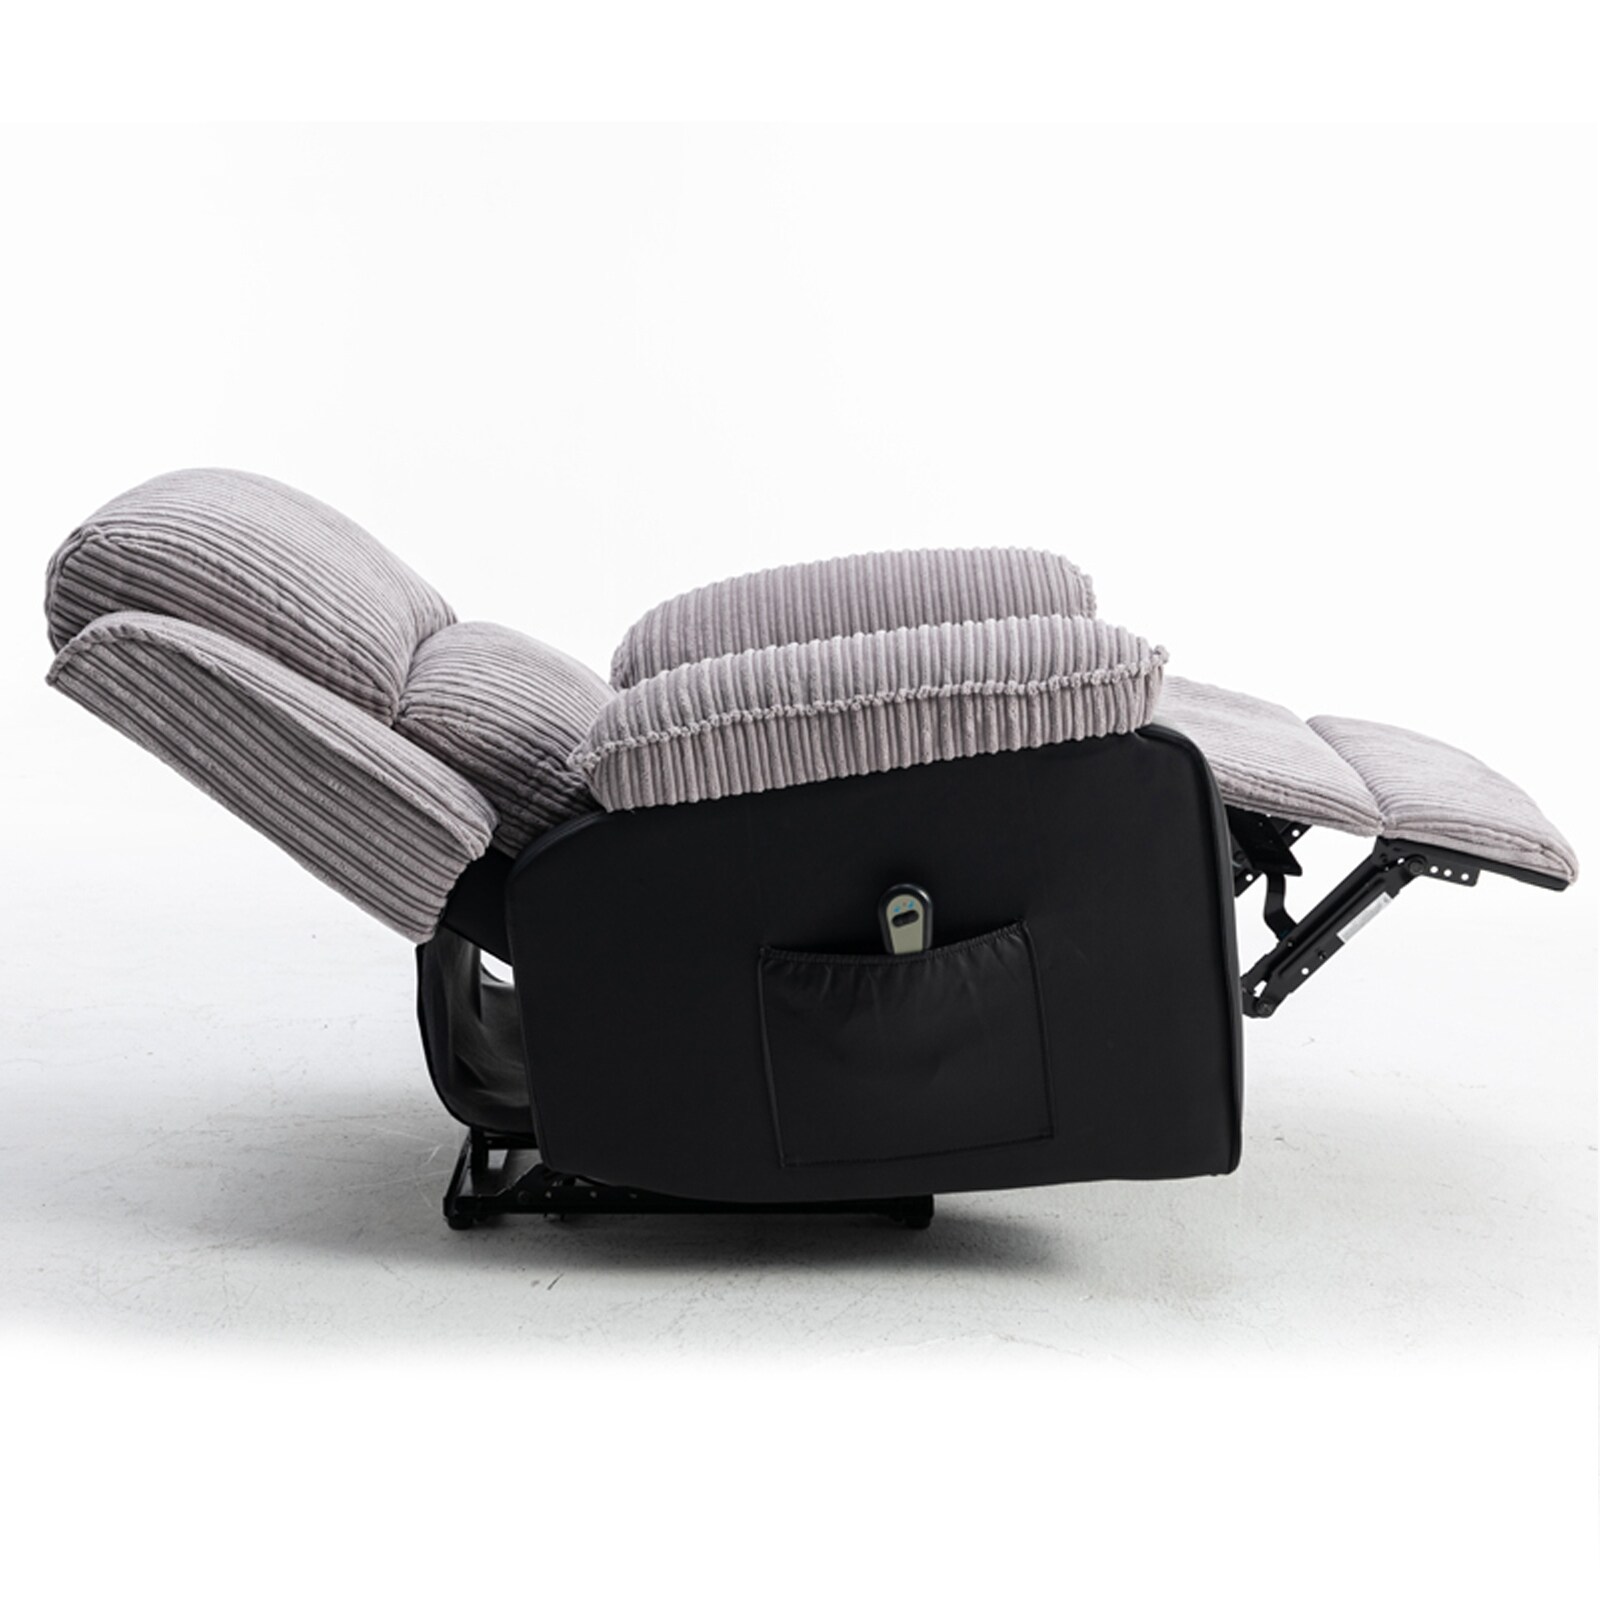 https://ak1.ostkcdn.com/images/products/is/images/direct/1ddf99586feaa232816652c84ca0da530f8ab3a1/Fabric-Recliner-Chair-Theater-Single-Recliner-Thick-Seat-and-Backrest.jpg